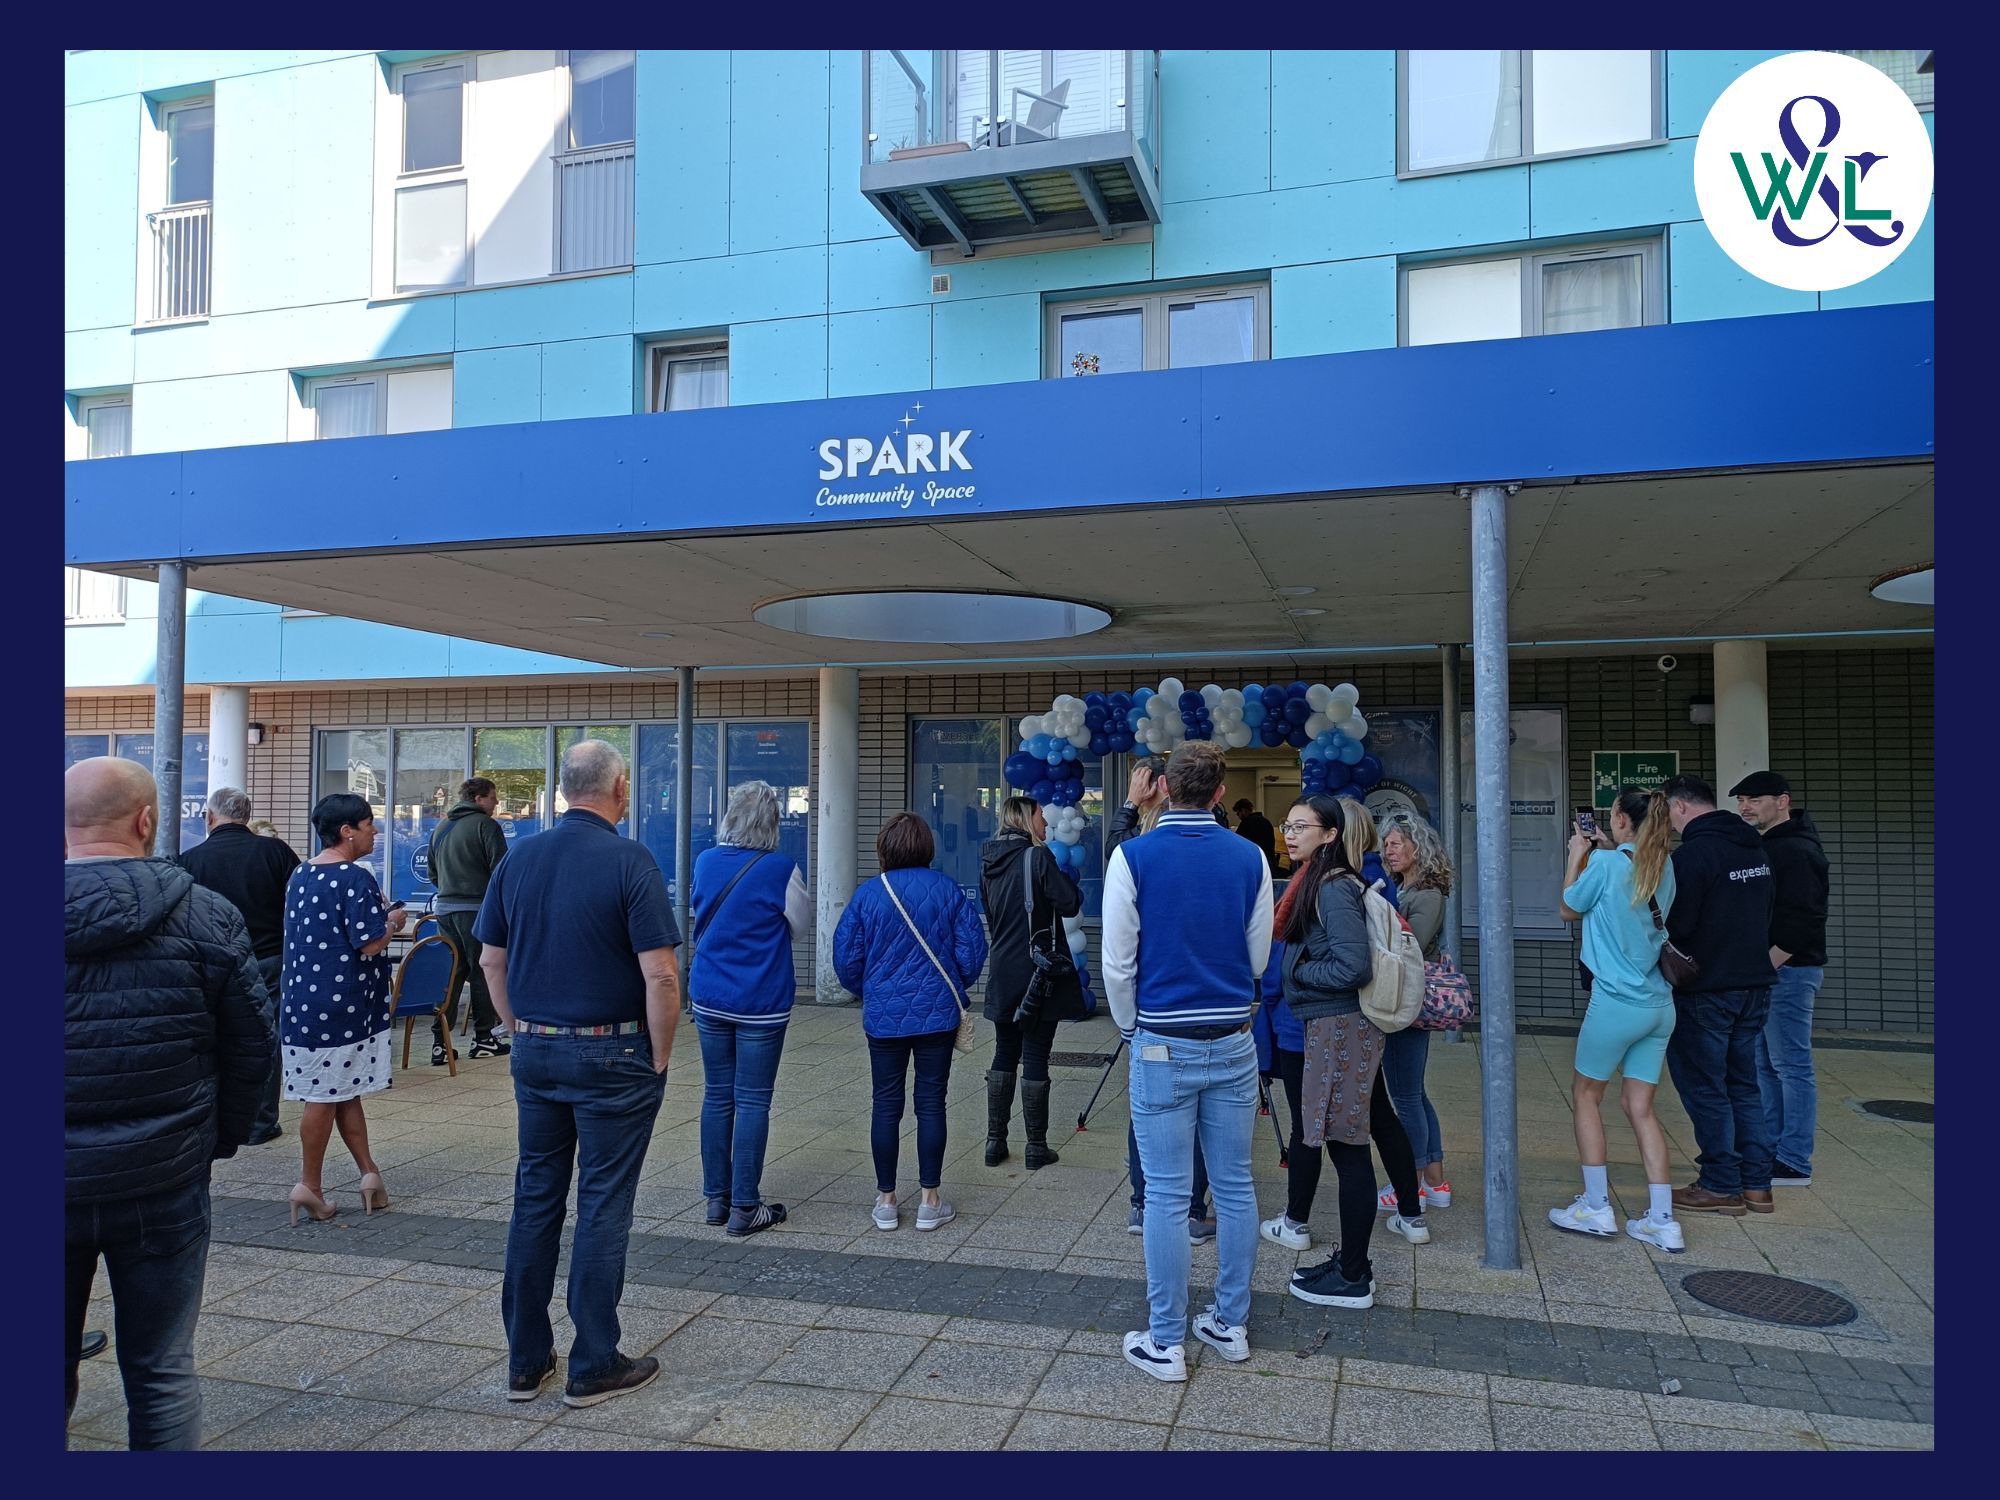 Outside a retail unit Spark Community Space, a crowd has gathered excited for the launch day. Moslty blue in aspect with the blue building and blue merchandise jackets that can be seen worn by some supporters.